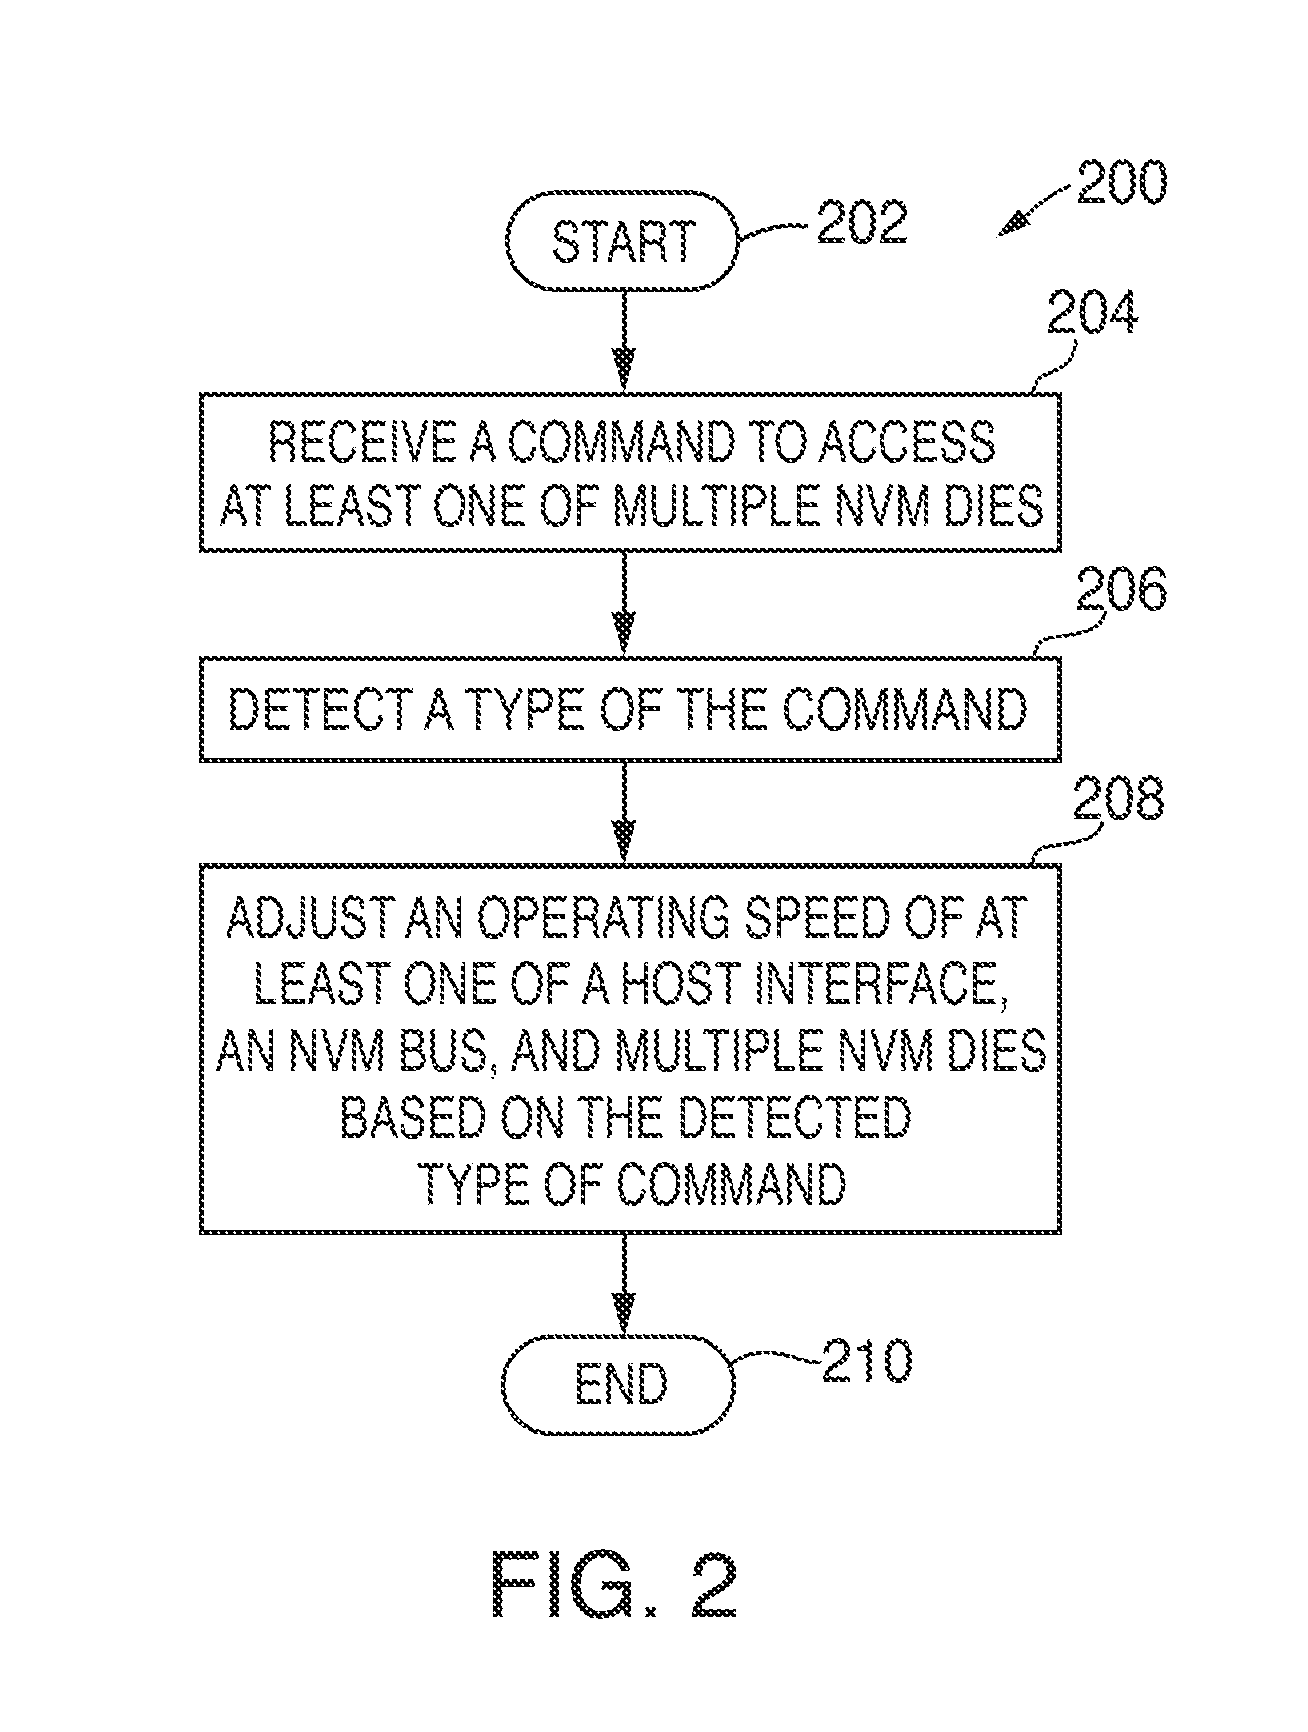 Power management for a system having non-volatile memory